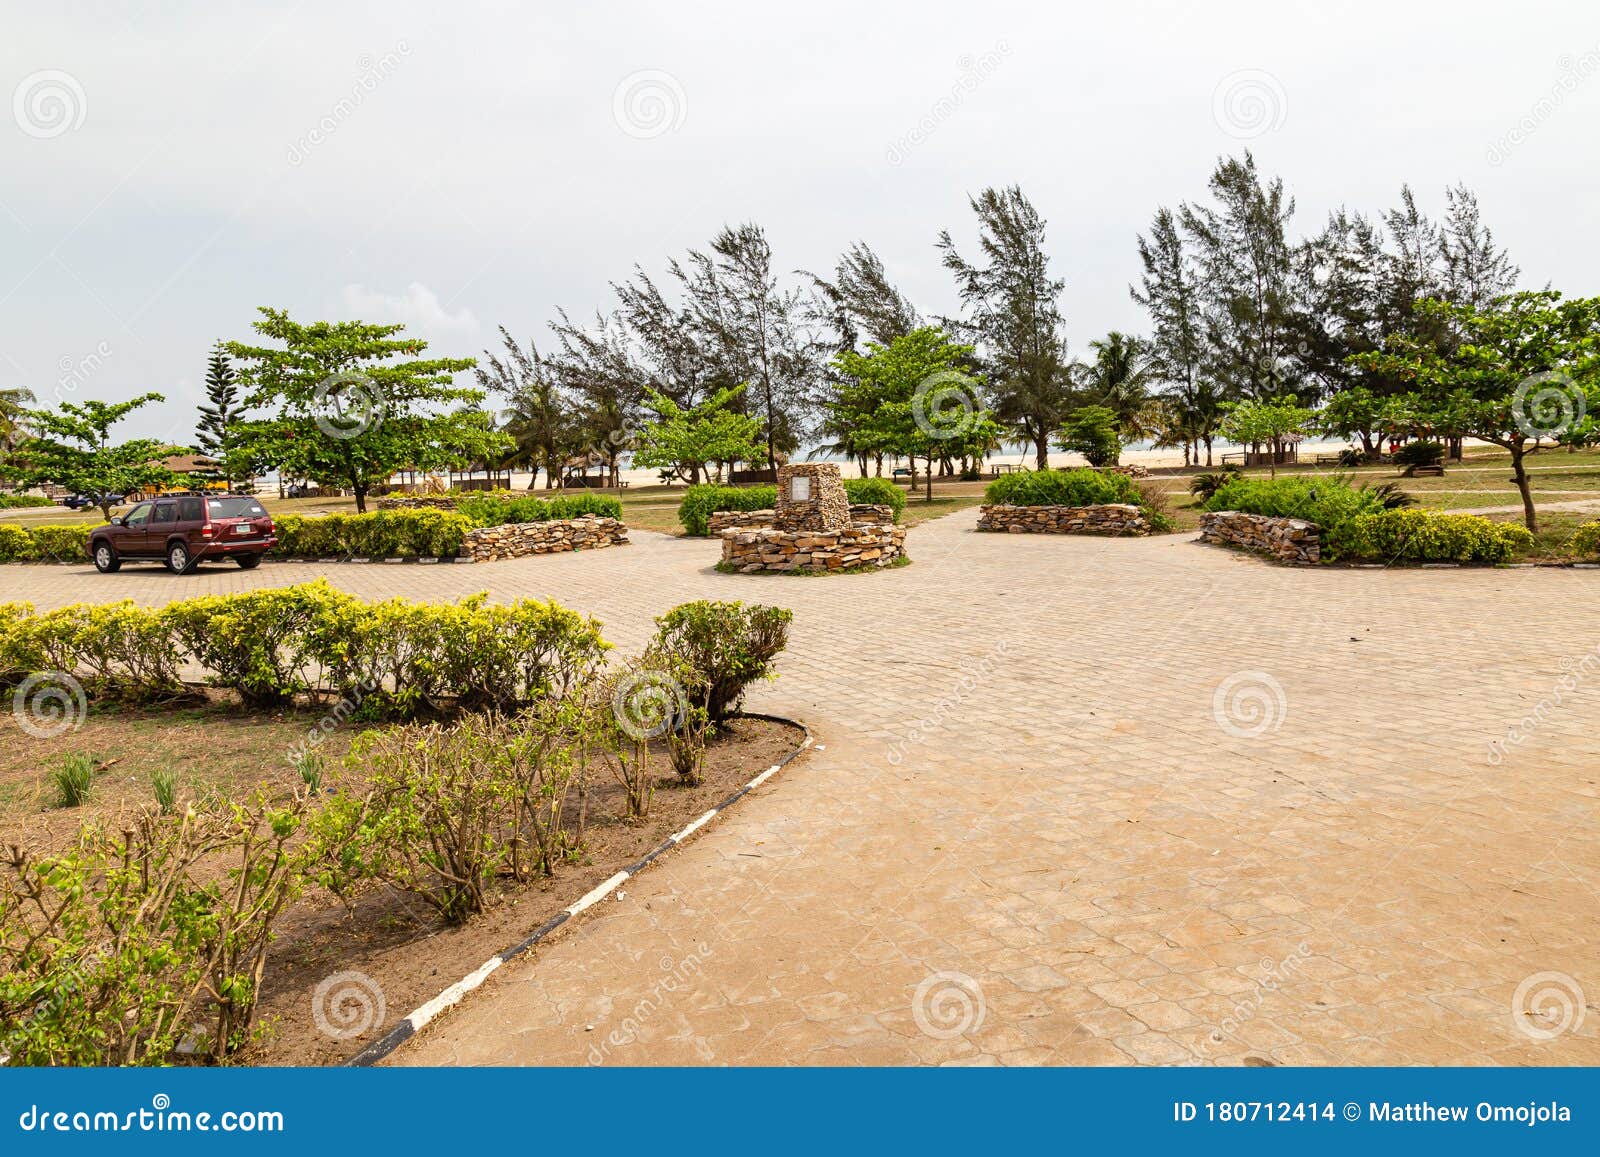 lagos beaches; frontage and beach awolowo institute of government policy museum lekki town in ibeju lekki, lagos state nigeria.